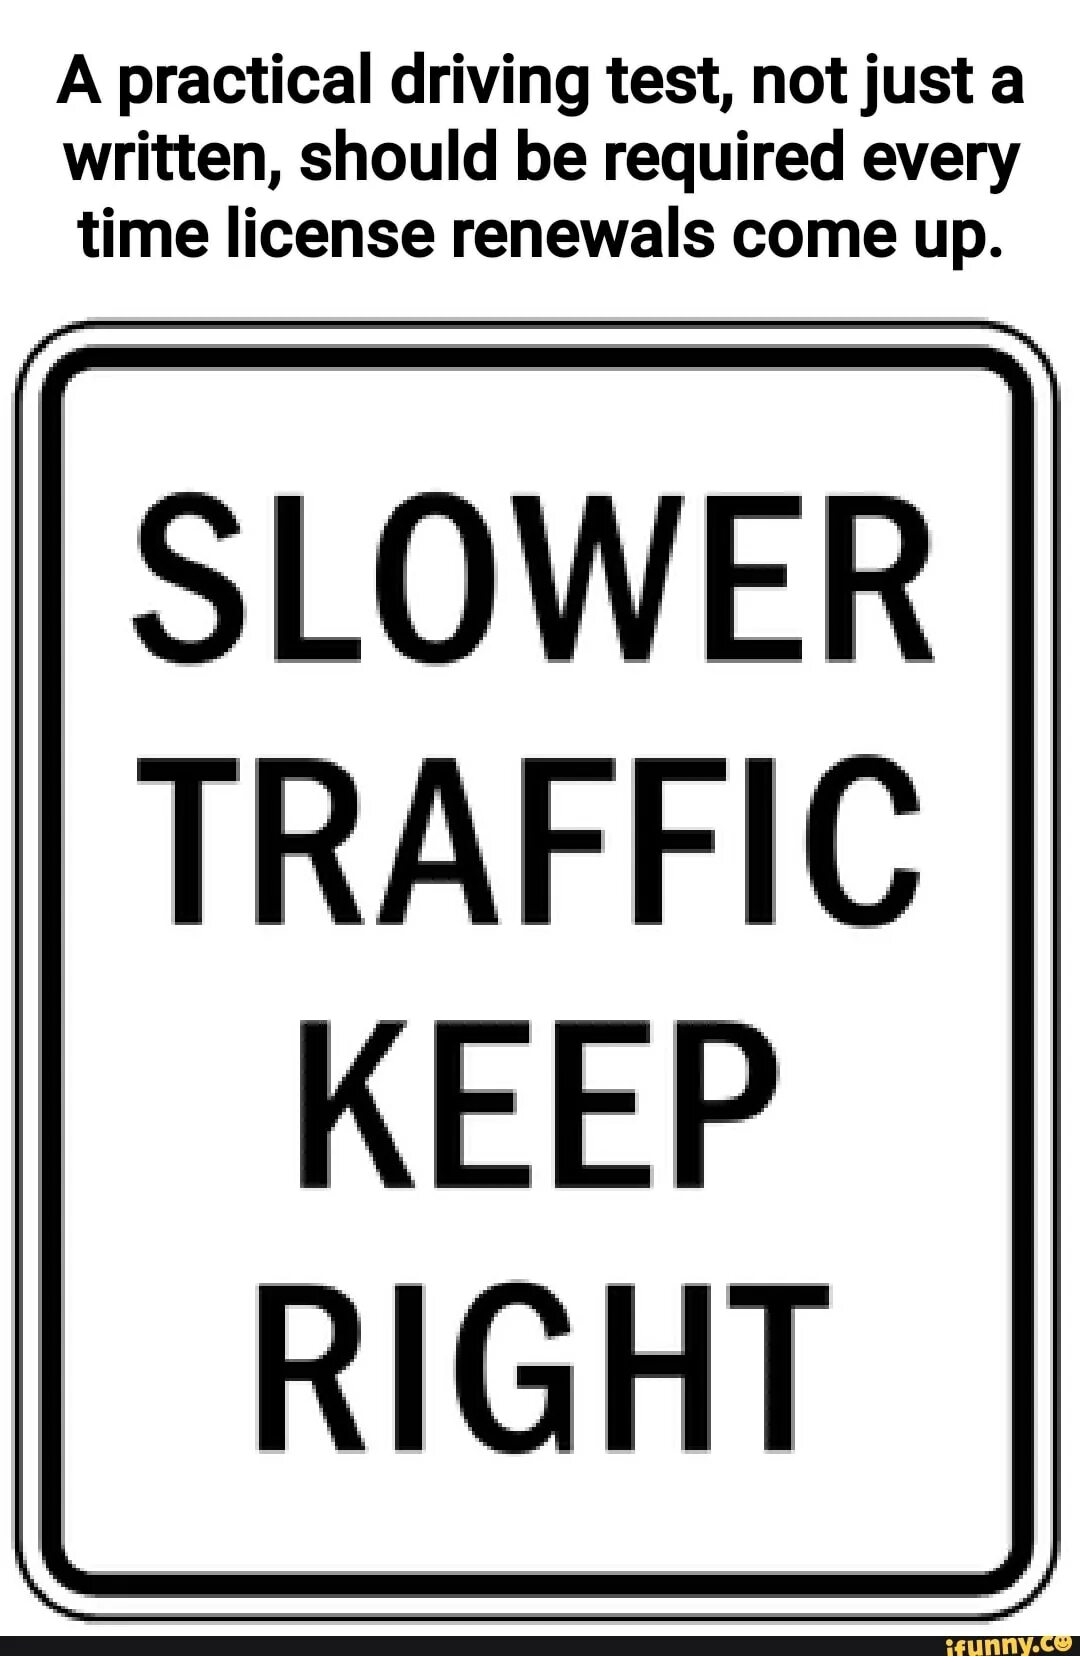 Keep the come up. Slower. Keep right. Please Drive slowly sign. Practice sign.